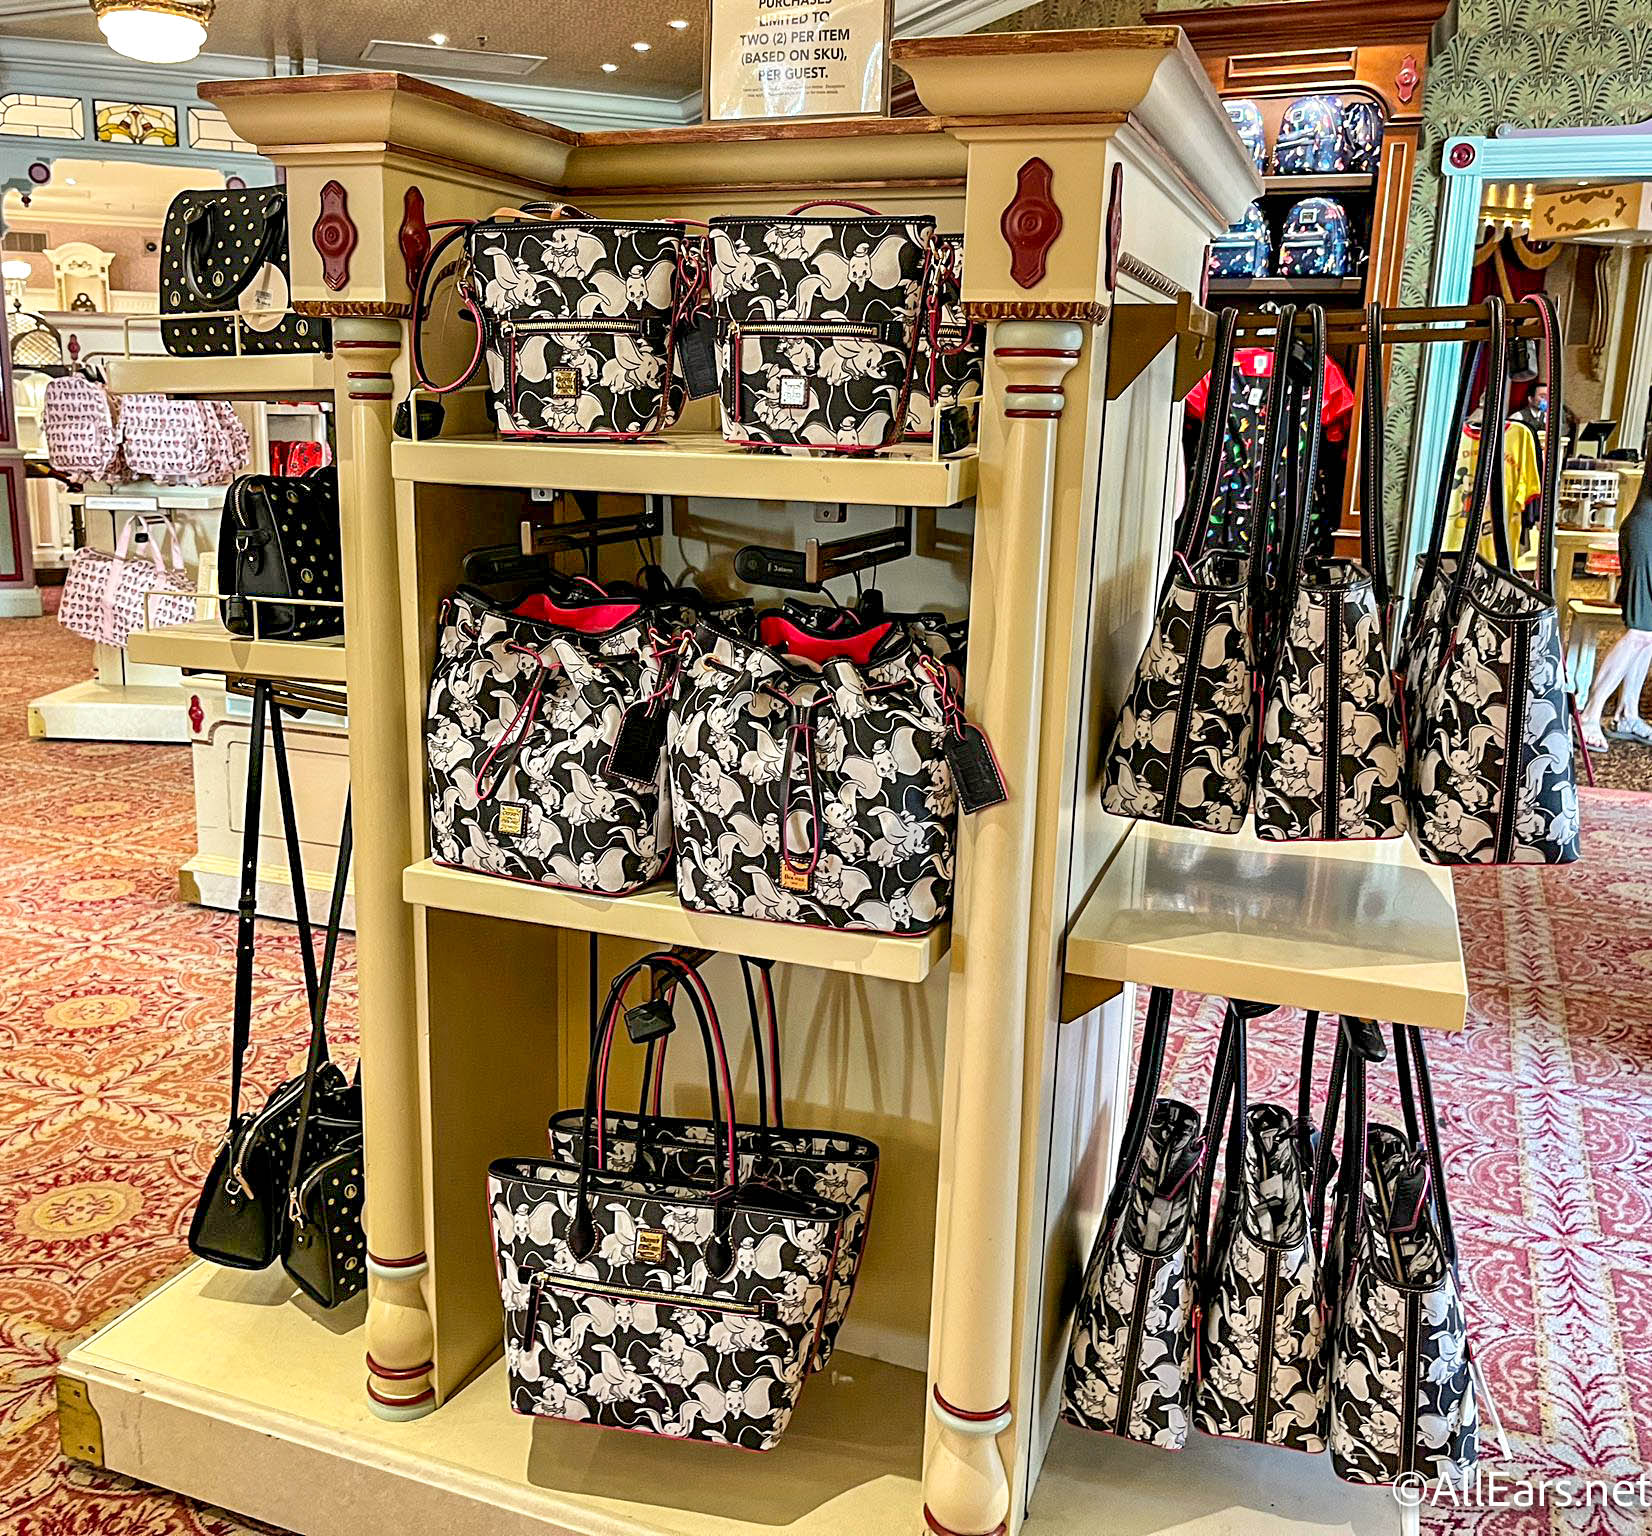 New 'Steamboat Willie' Bags by Dooney & Bourke Available at Walt